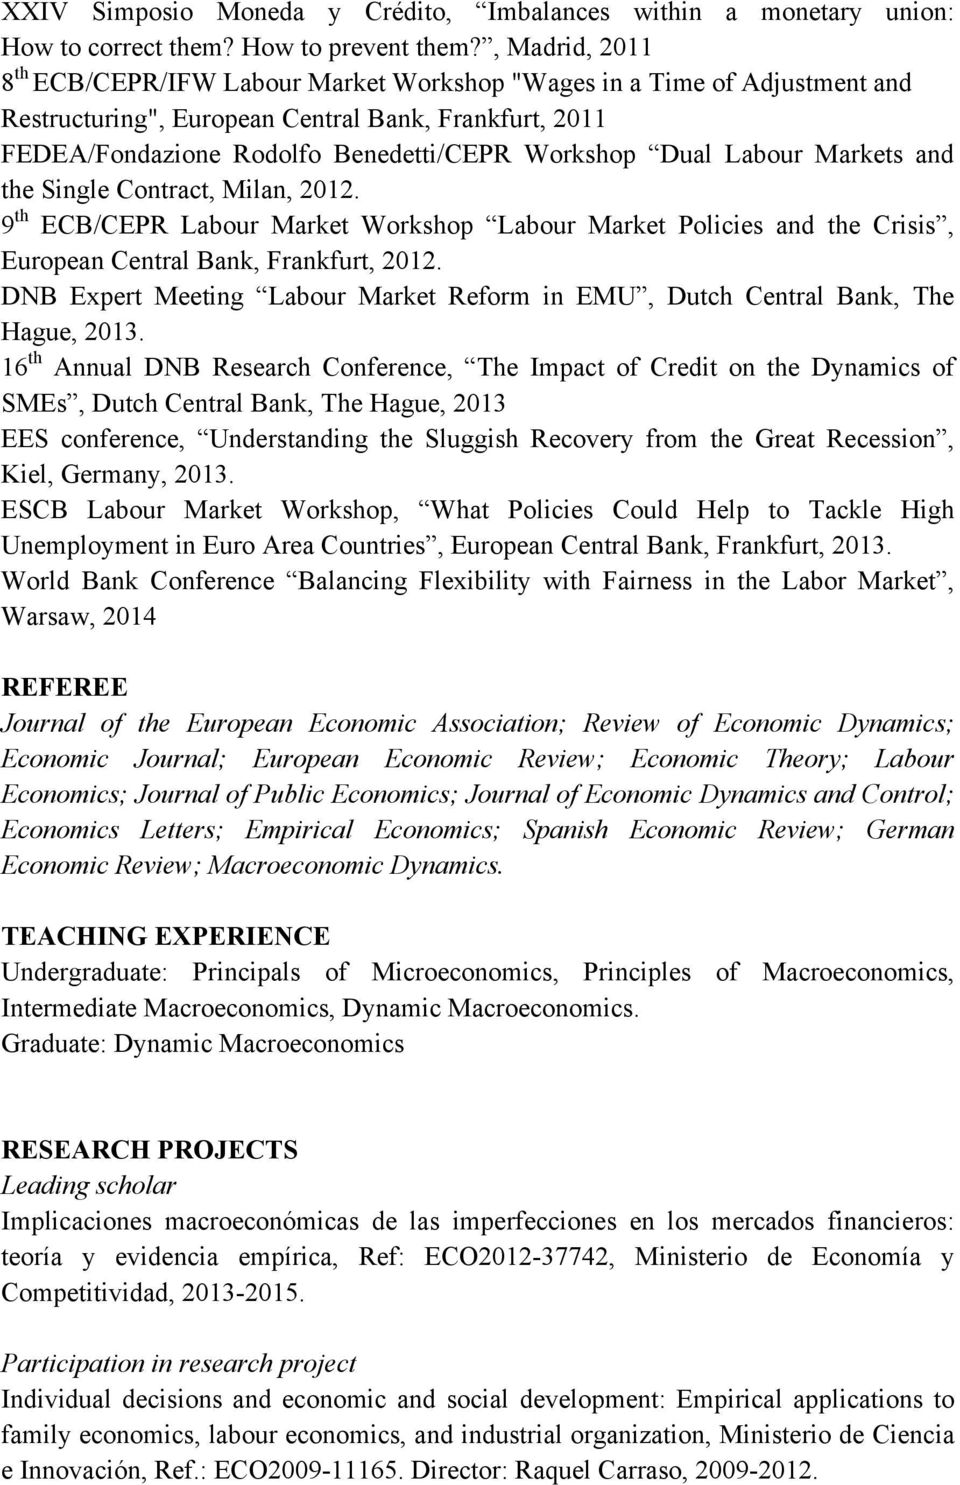 Labour Markets and the Single Contract, Milan, 2012. 9 th ECB/CEPR Labour Market Workshop Labour Market Policies and the Crisis, European Central Bank, Frankfurt, 2012.